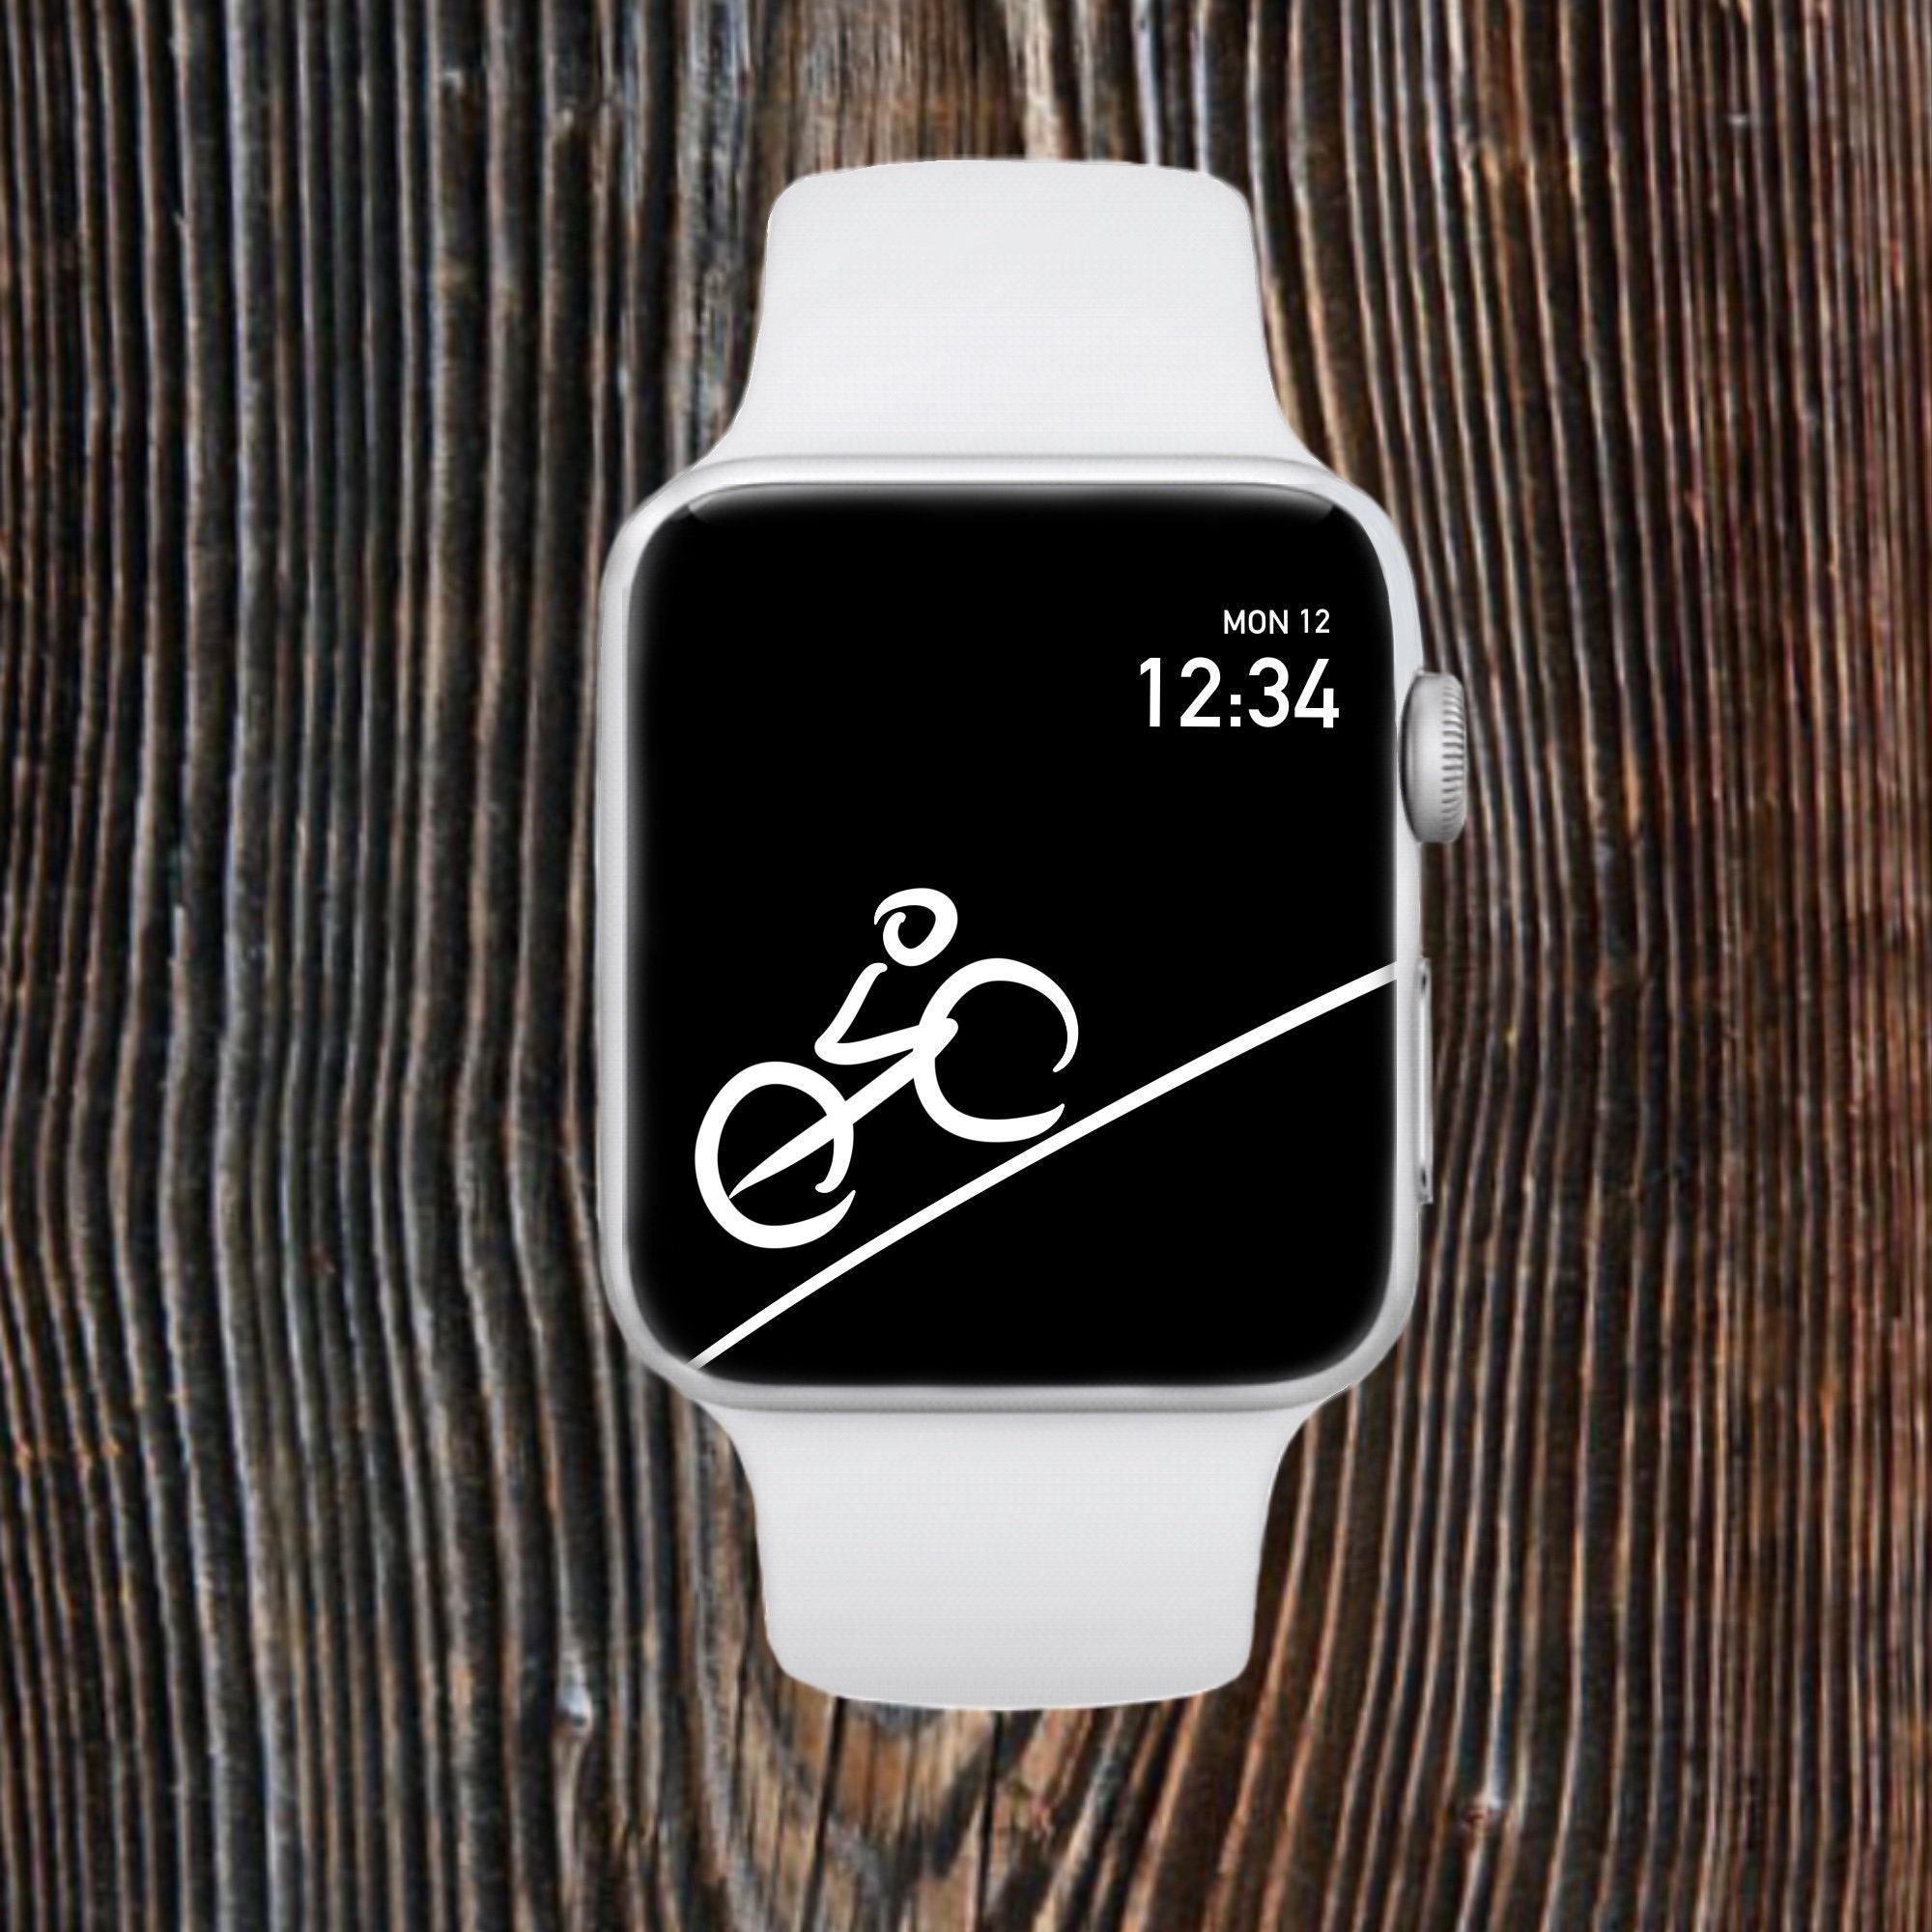 Apple Watch faces and their features  Apple Support